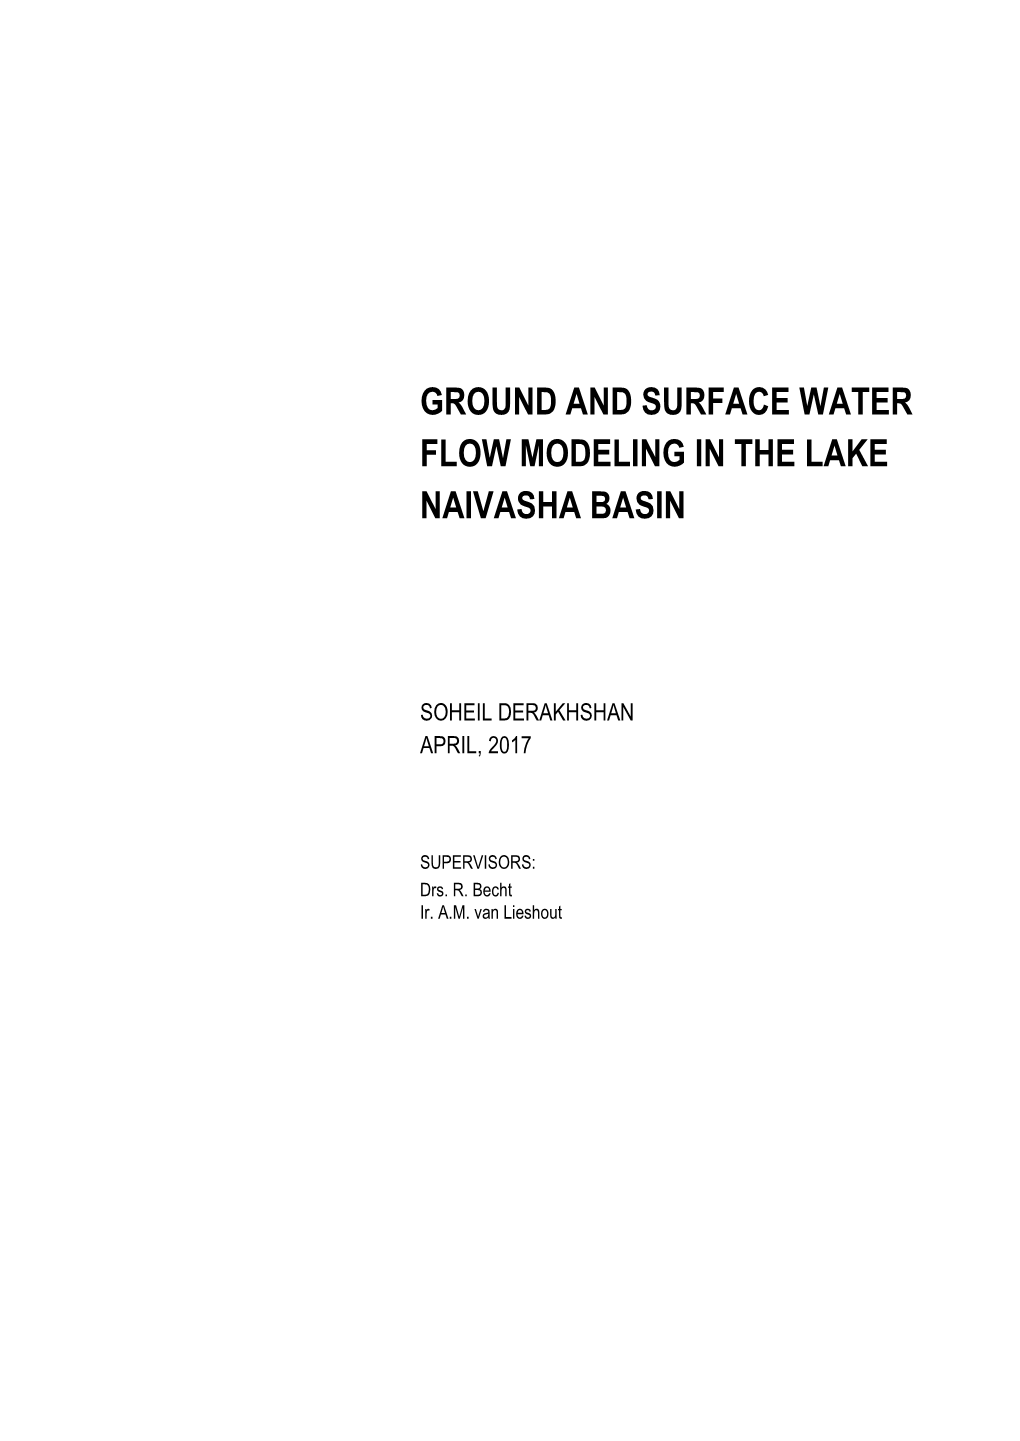 Ground and Surface Water Flow Modeling in the Lake Naivasha Basin